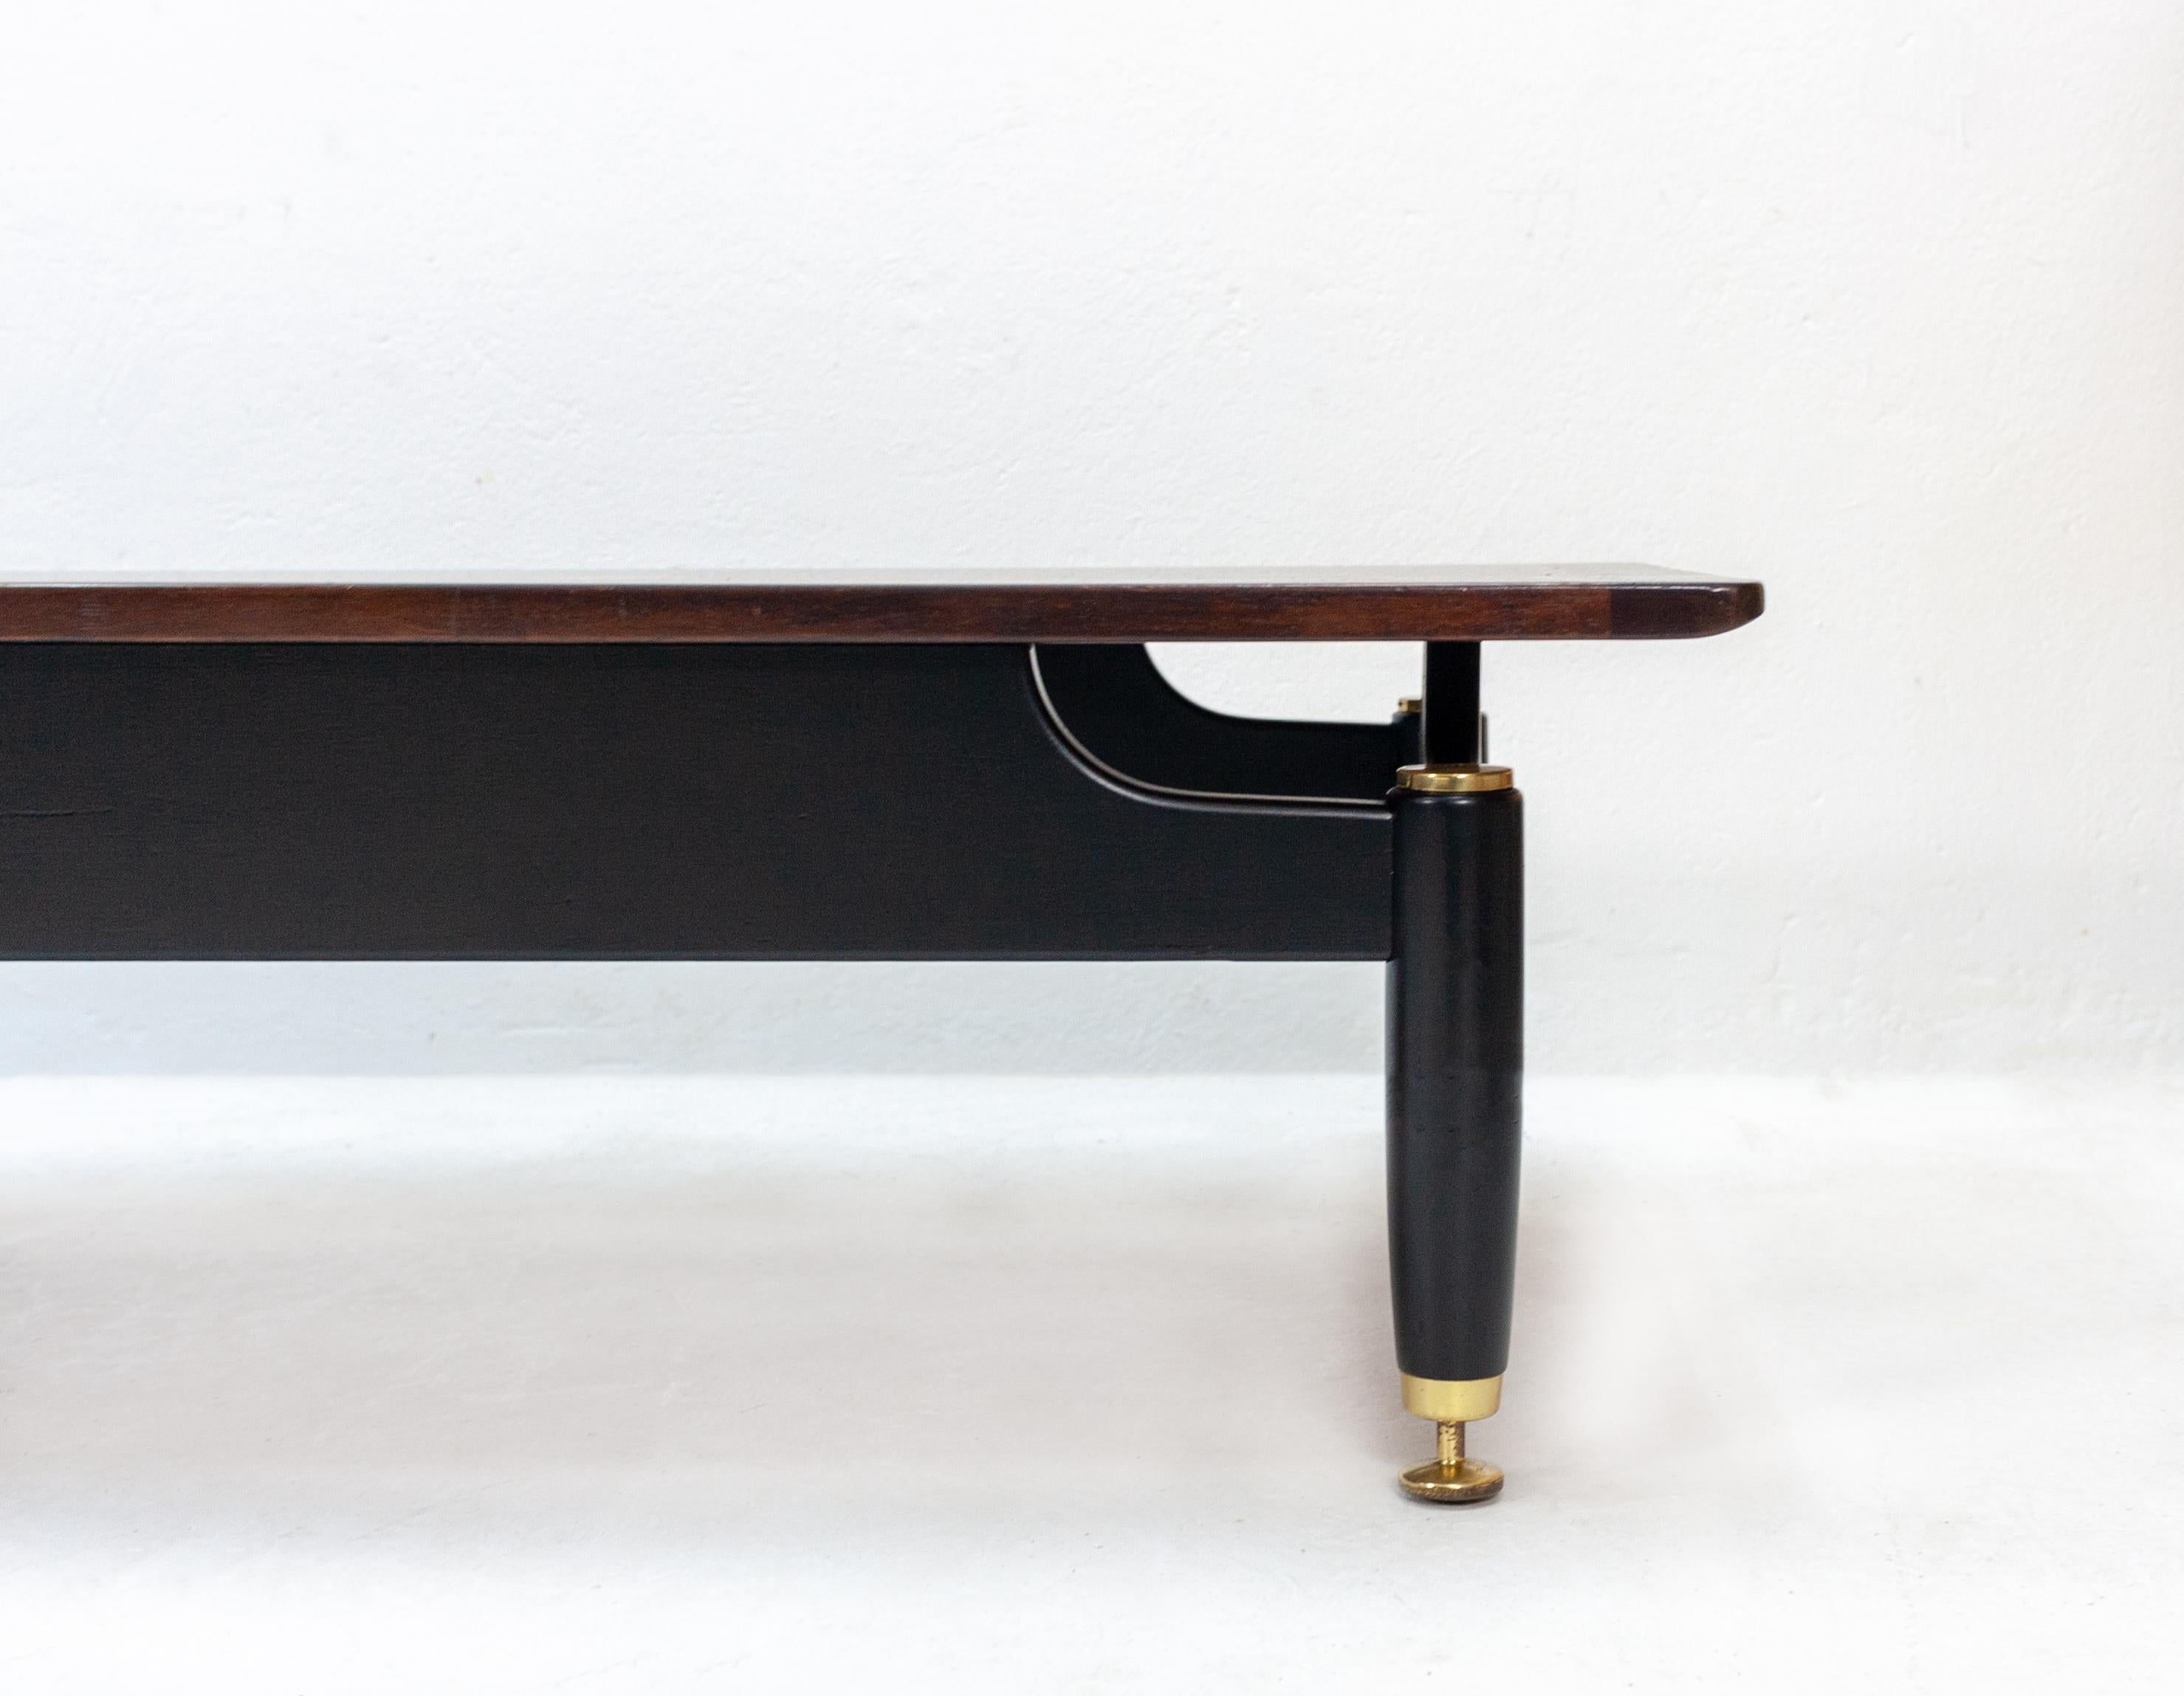 G-Plan long John teak coffee table with brass hardware, designed by G. Romme.
Very nice and unusual low-slung design. Made in England, 1960s.